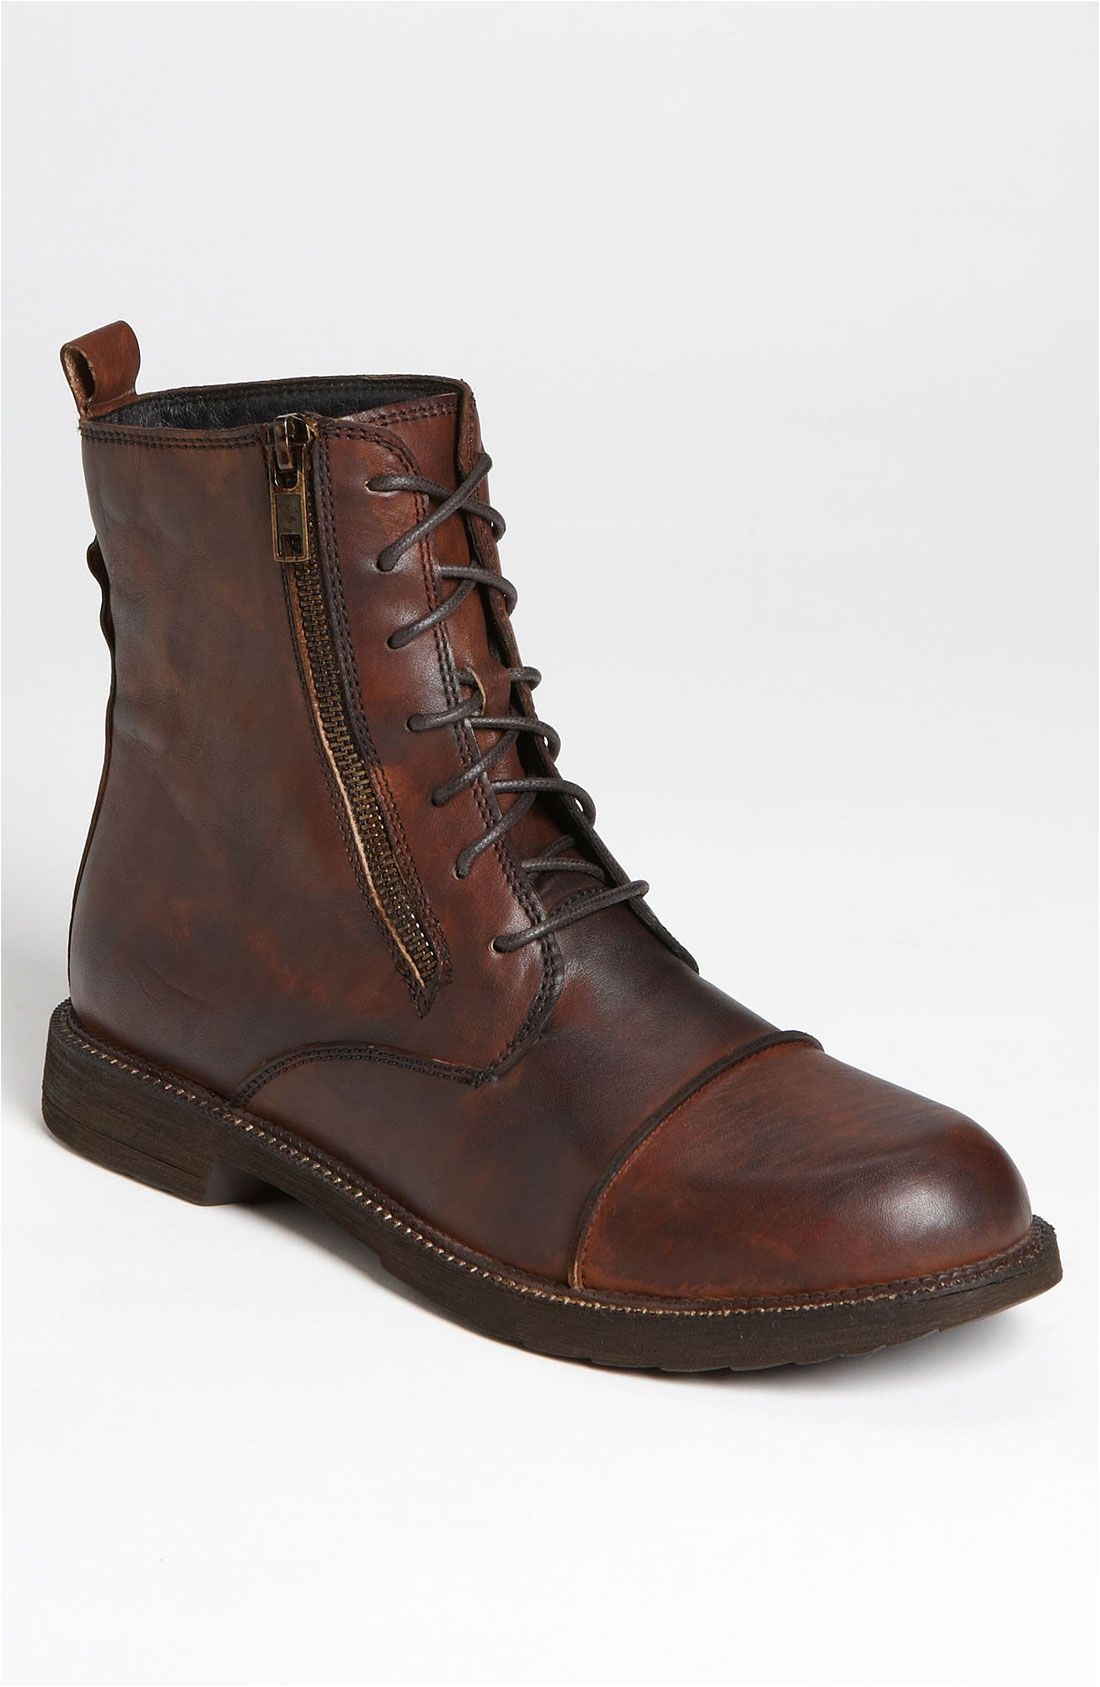 free shipping and returns on bed stu patriot cap toe boot men